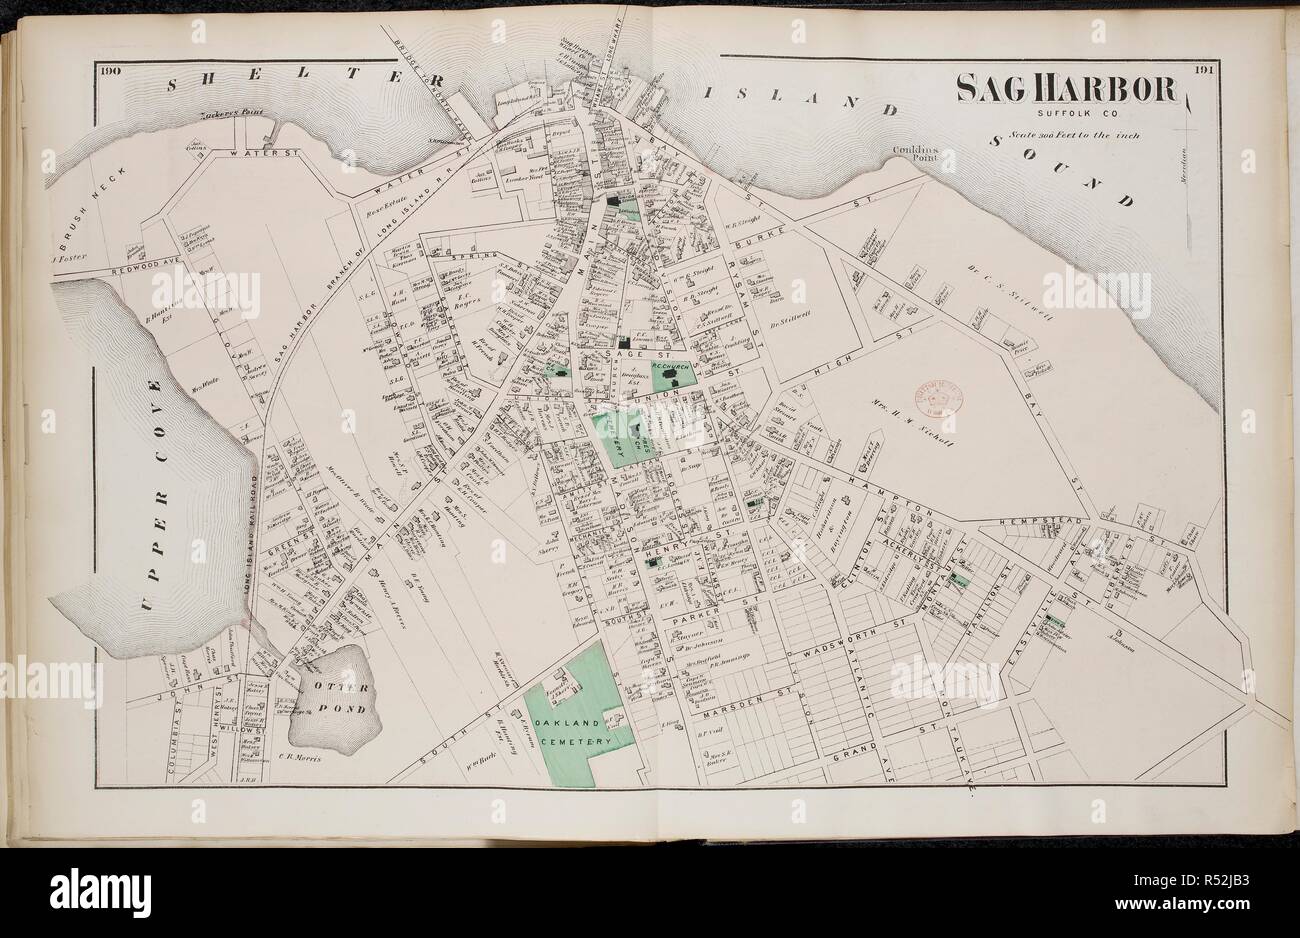 Map of Sag Harbor, on Long Island New York in the United States. . Atlas of Long Island, New York. From recent and actual Surveys and Records under the superintendence of F.W. Beers. New York, 1873. Source: Maps 33.d.17 ff.190-191. Language: English. Stock Photo